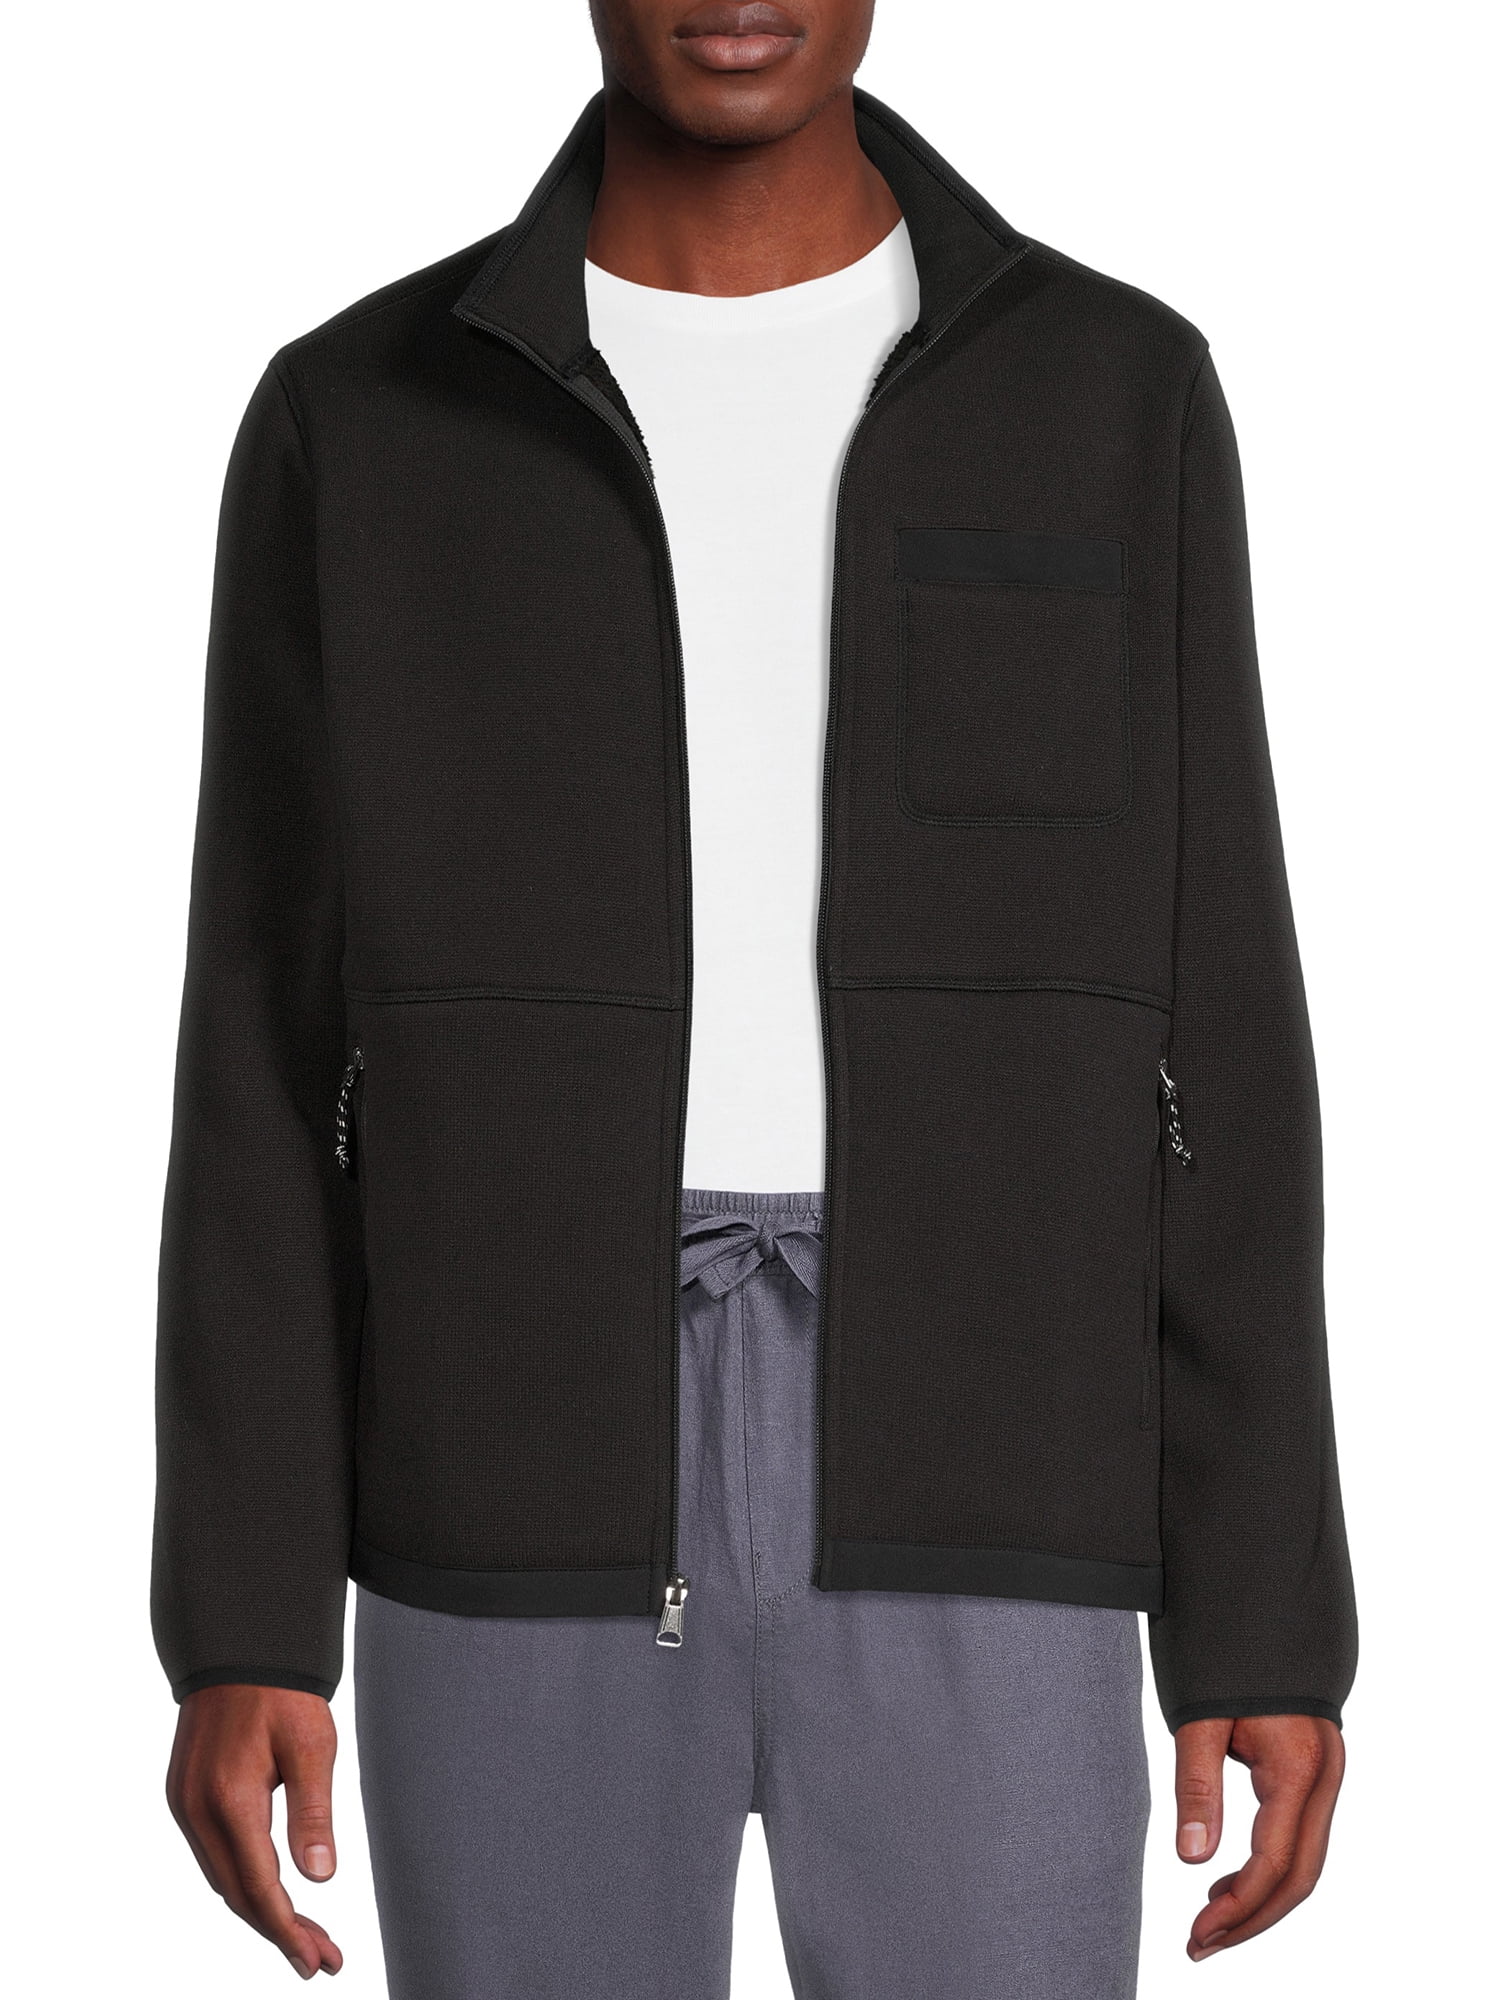 George Men's and Big Men's Sweater Fleece Jacket, Sizes up to 5XL